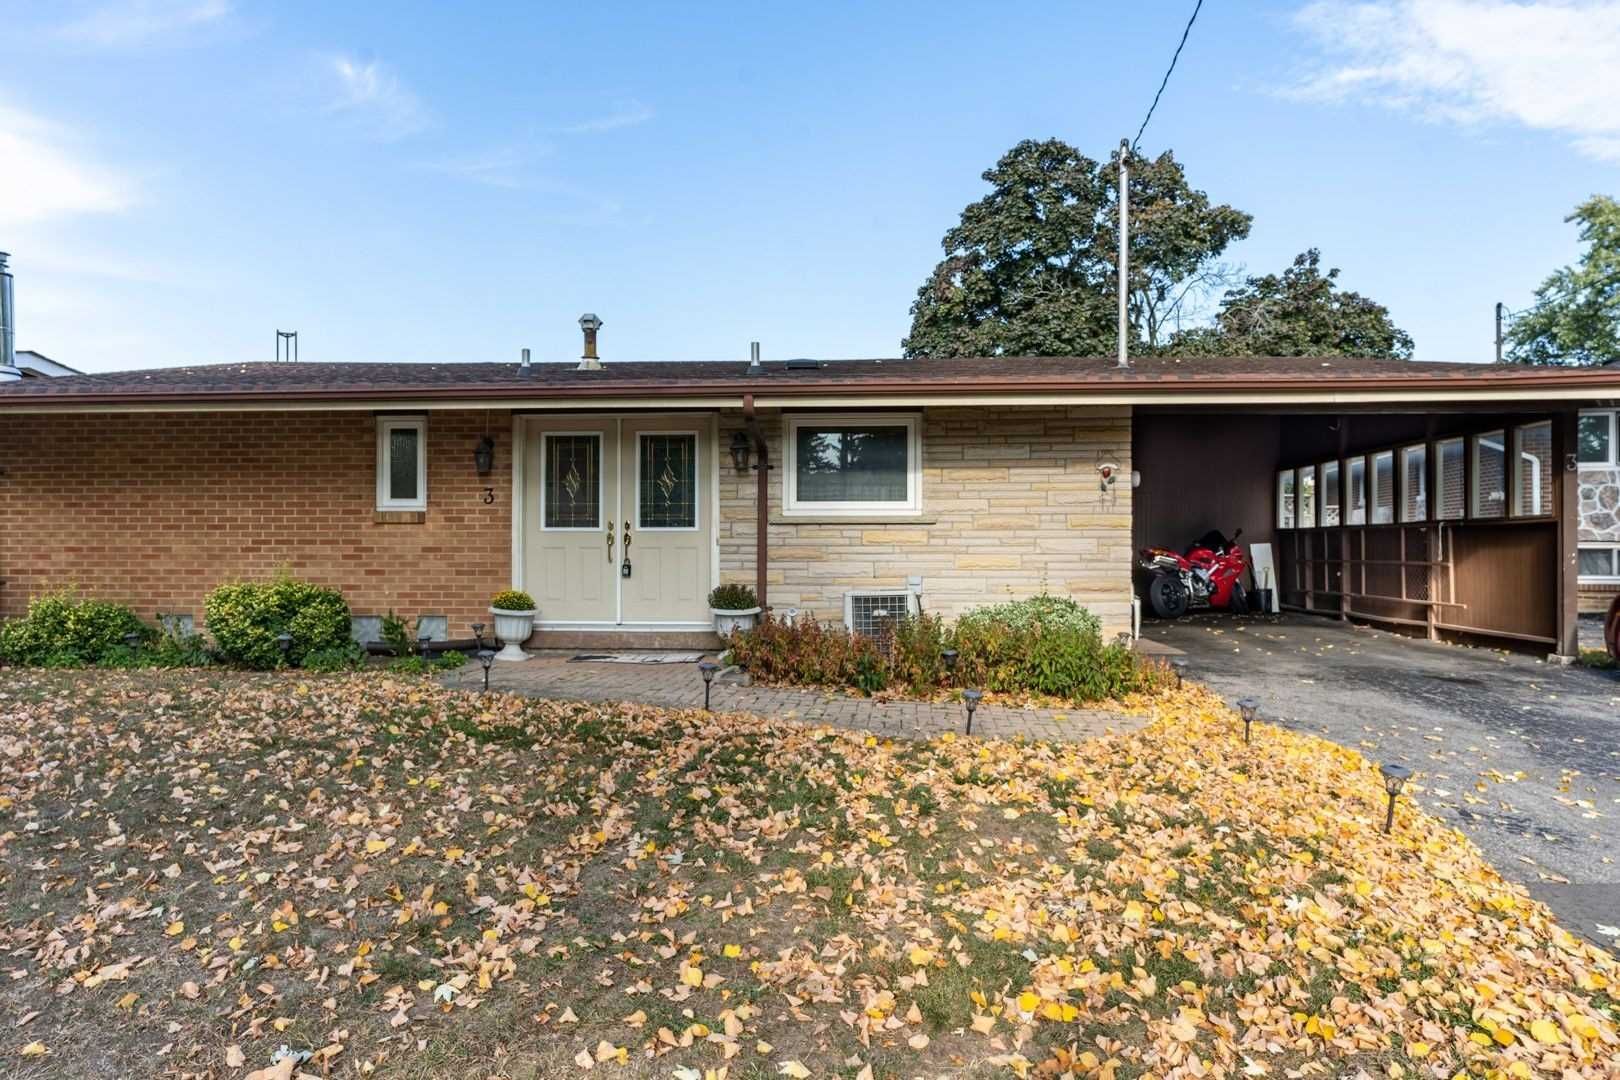 Main Photo: 3 Rosswood Crescent in Toronto: Bendale House (Bungalow) for sale (Toronto E09)  : MLS®# E4932683